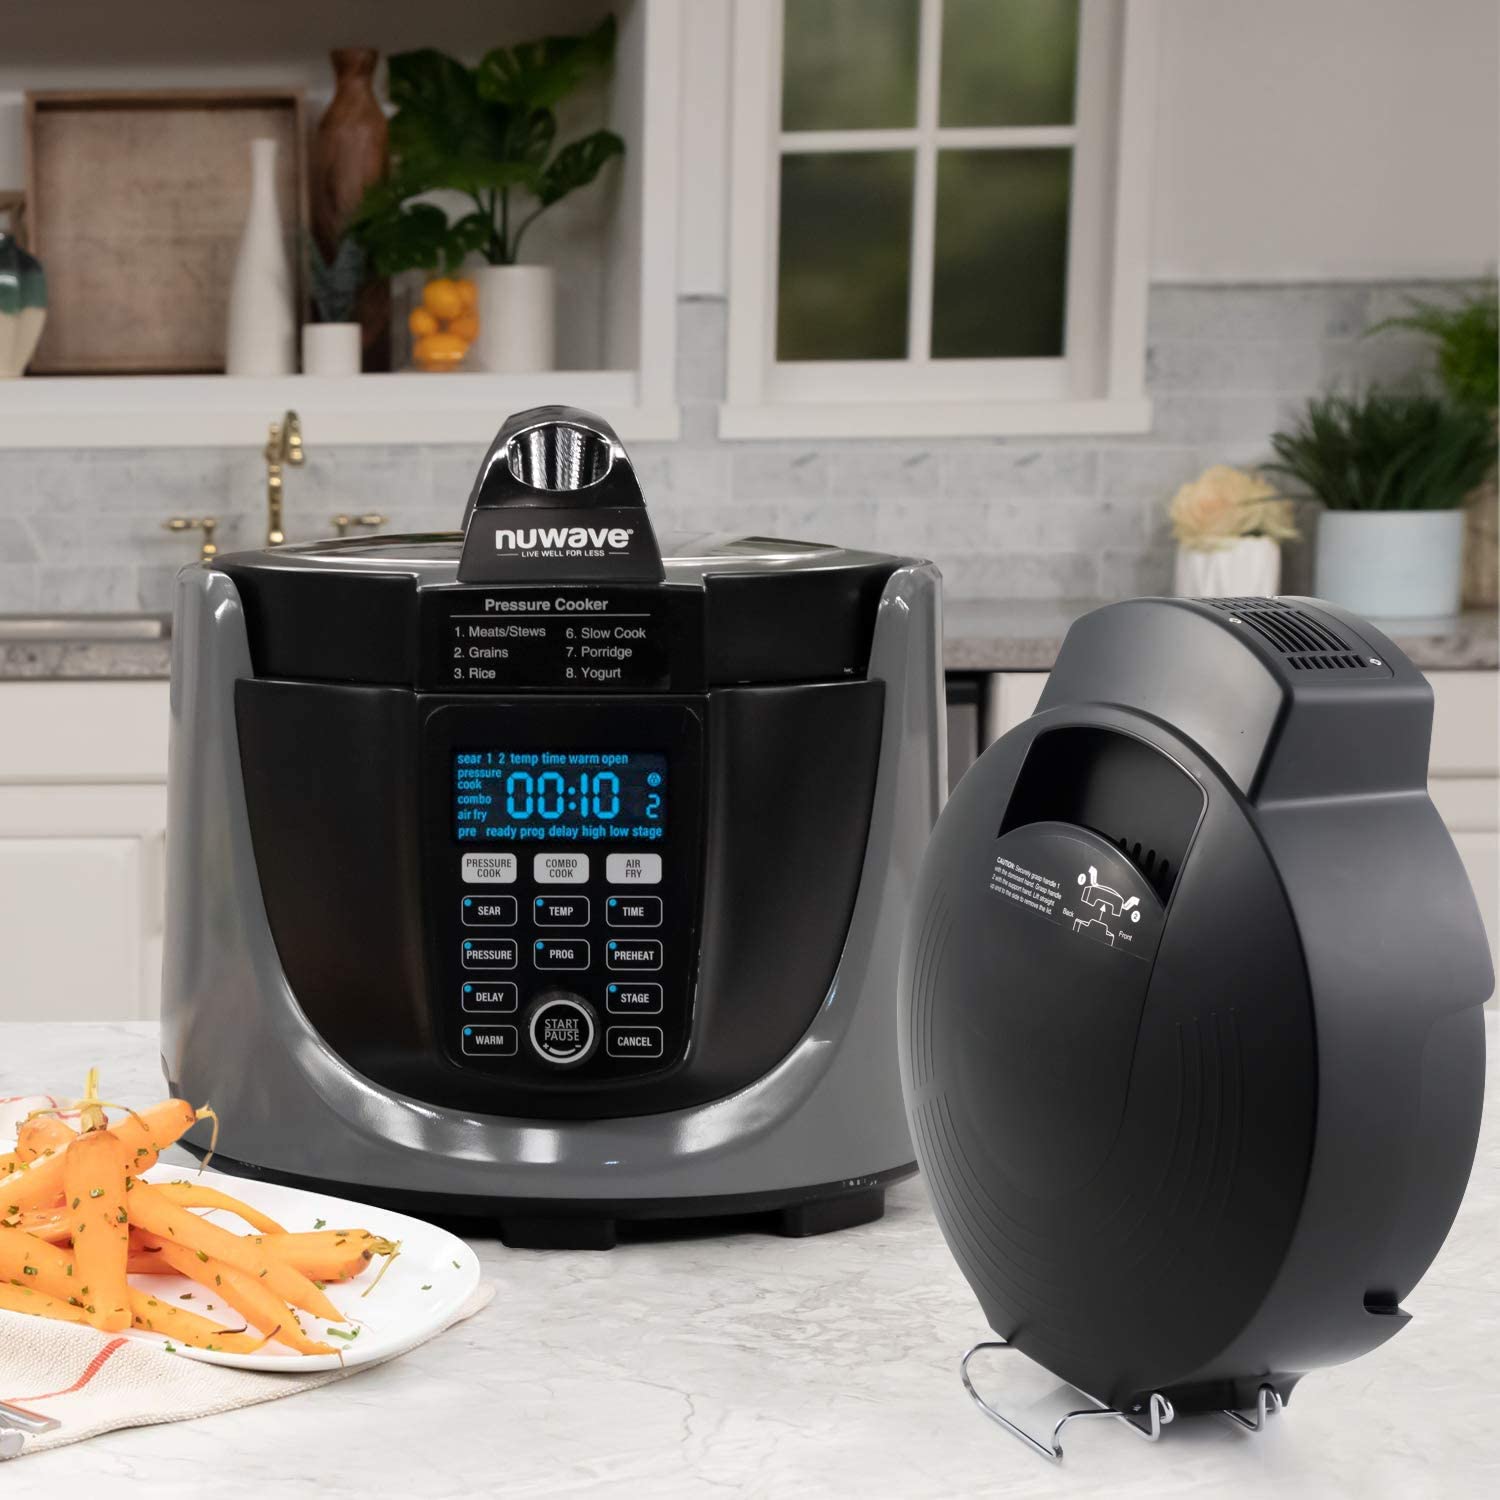 NuWave Duet Pressure Cooker, Air Fryer & Grill Combo Cooker with Removable  Pressure and Air Fry Lids, 6qt Stainless Steel Pot, 4qt Non-Stick Air Fryer